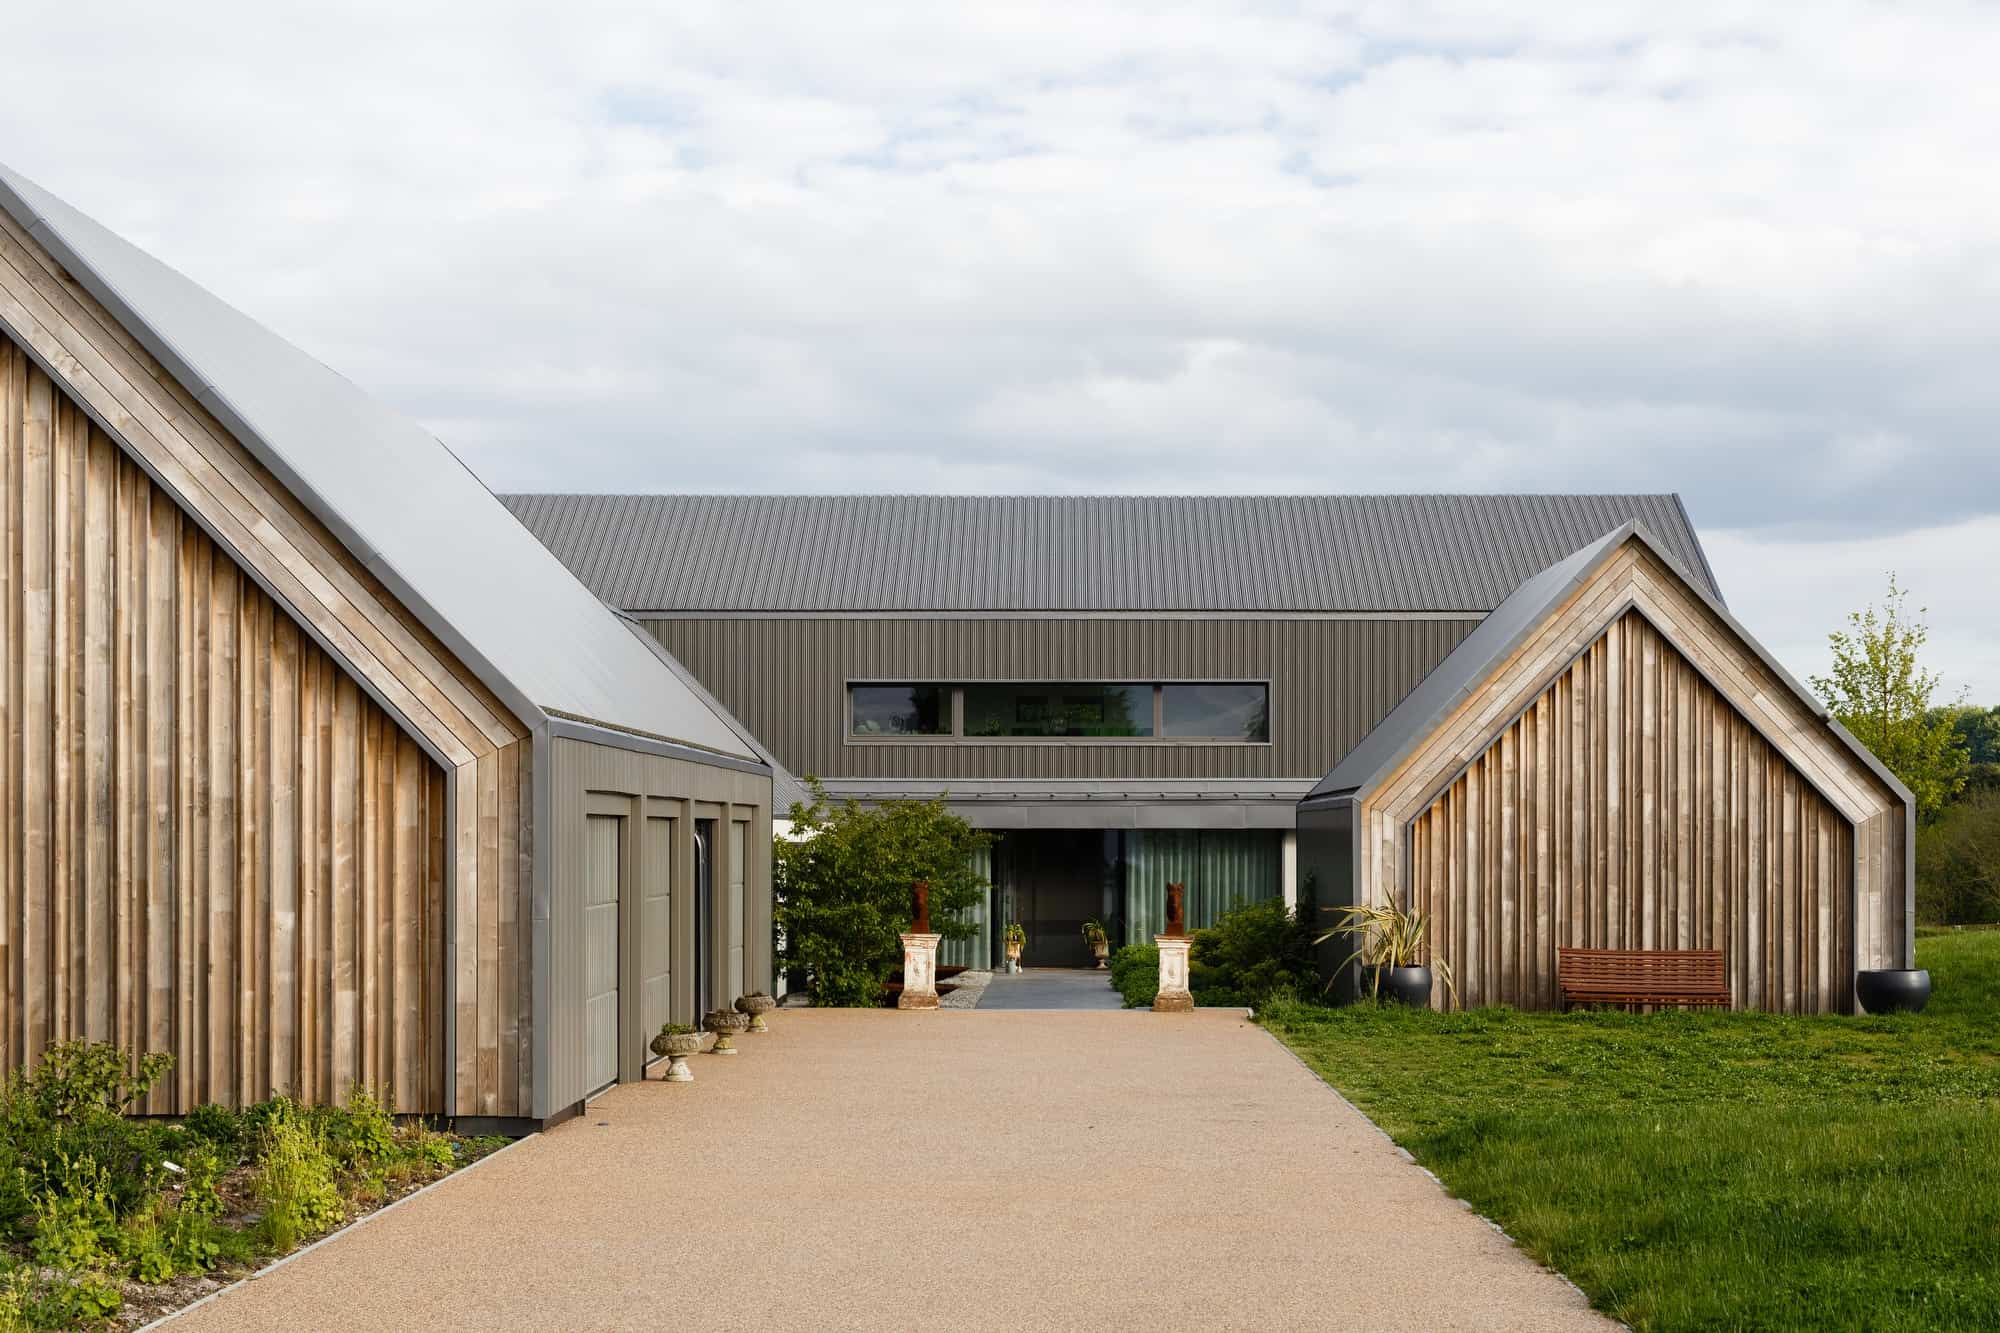 Lingfield Estate RH7 - A large contemporary passivhaus with equestrian facilities, nestled within 115 acres of private grounds with woodlands and rural landscapes - The Location Guys